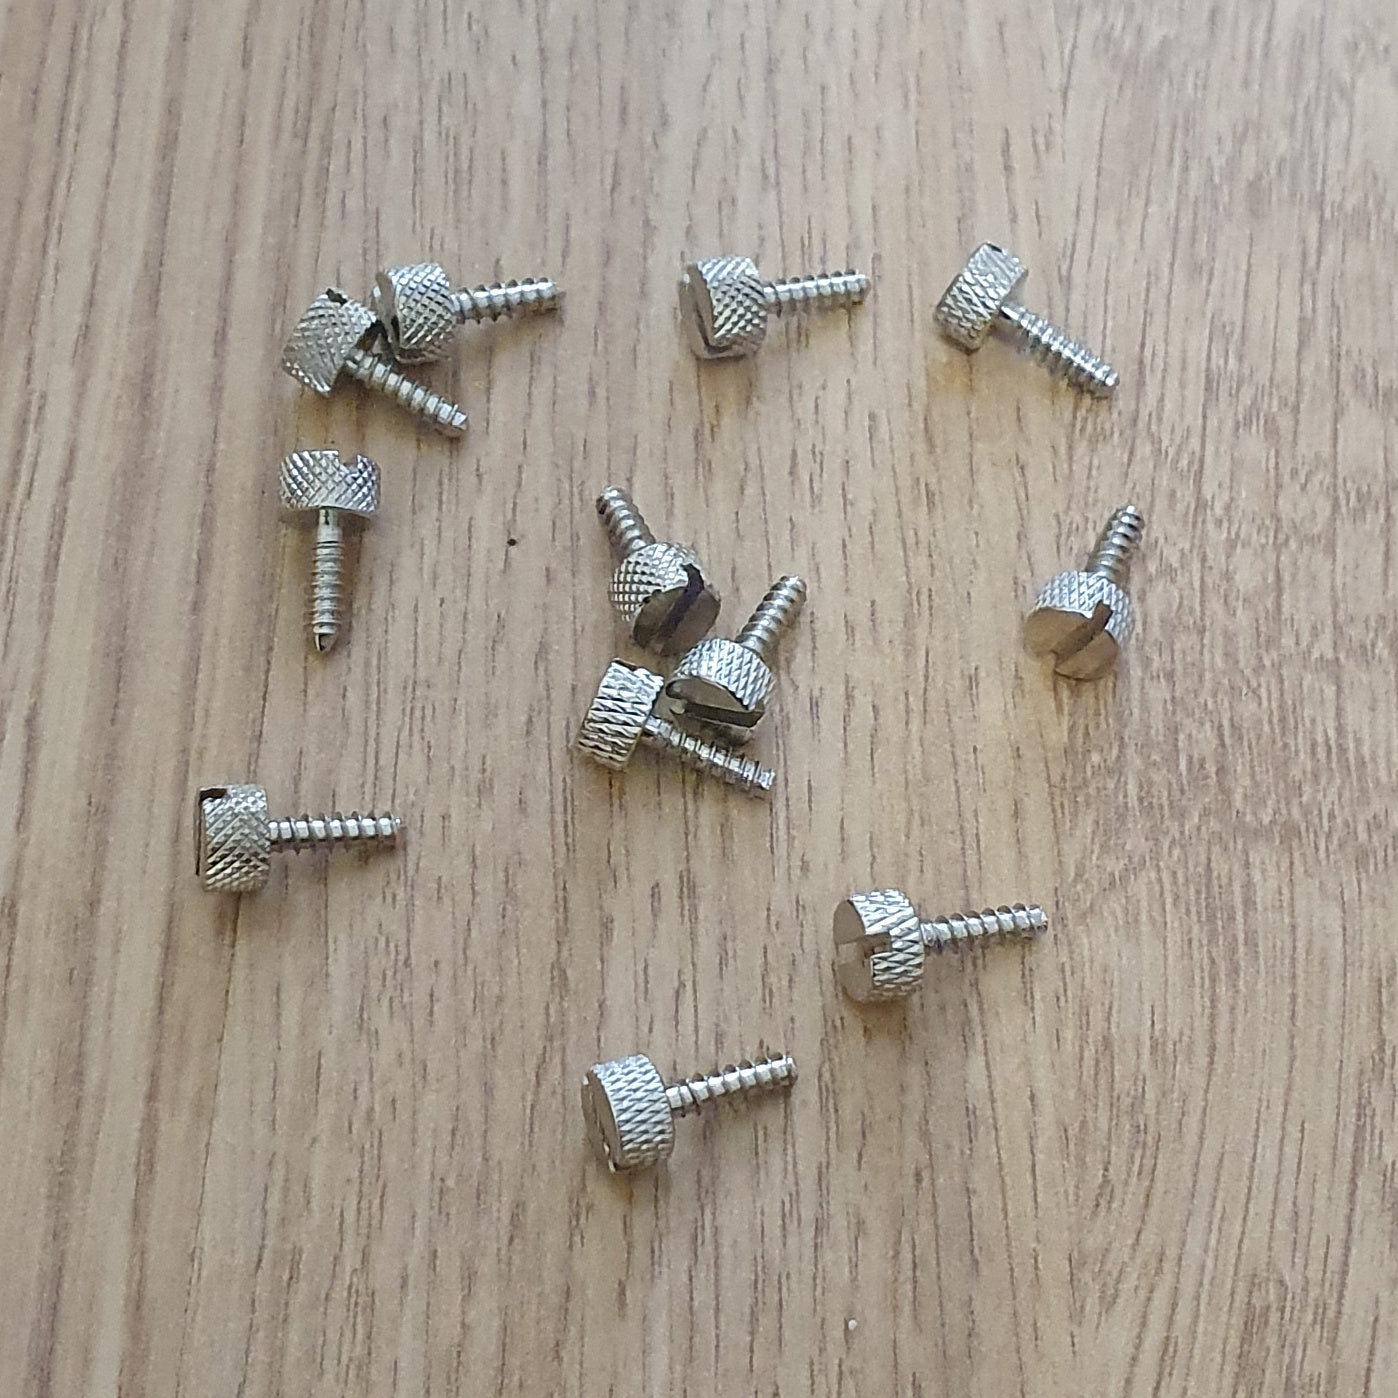 Scalextric Pack Of 12 Base Screws To Hold Cars In Position In Crystal Cases